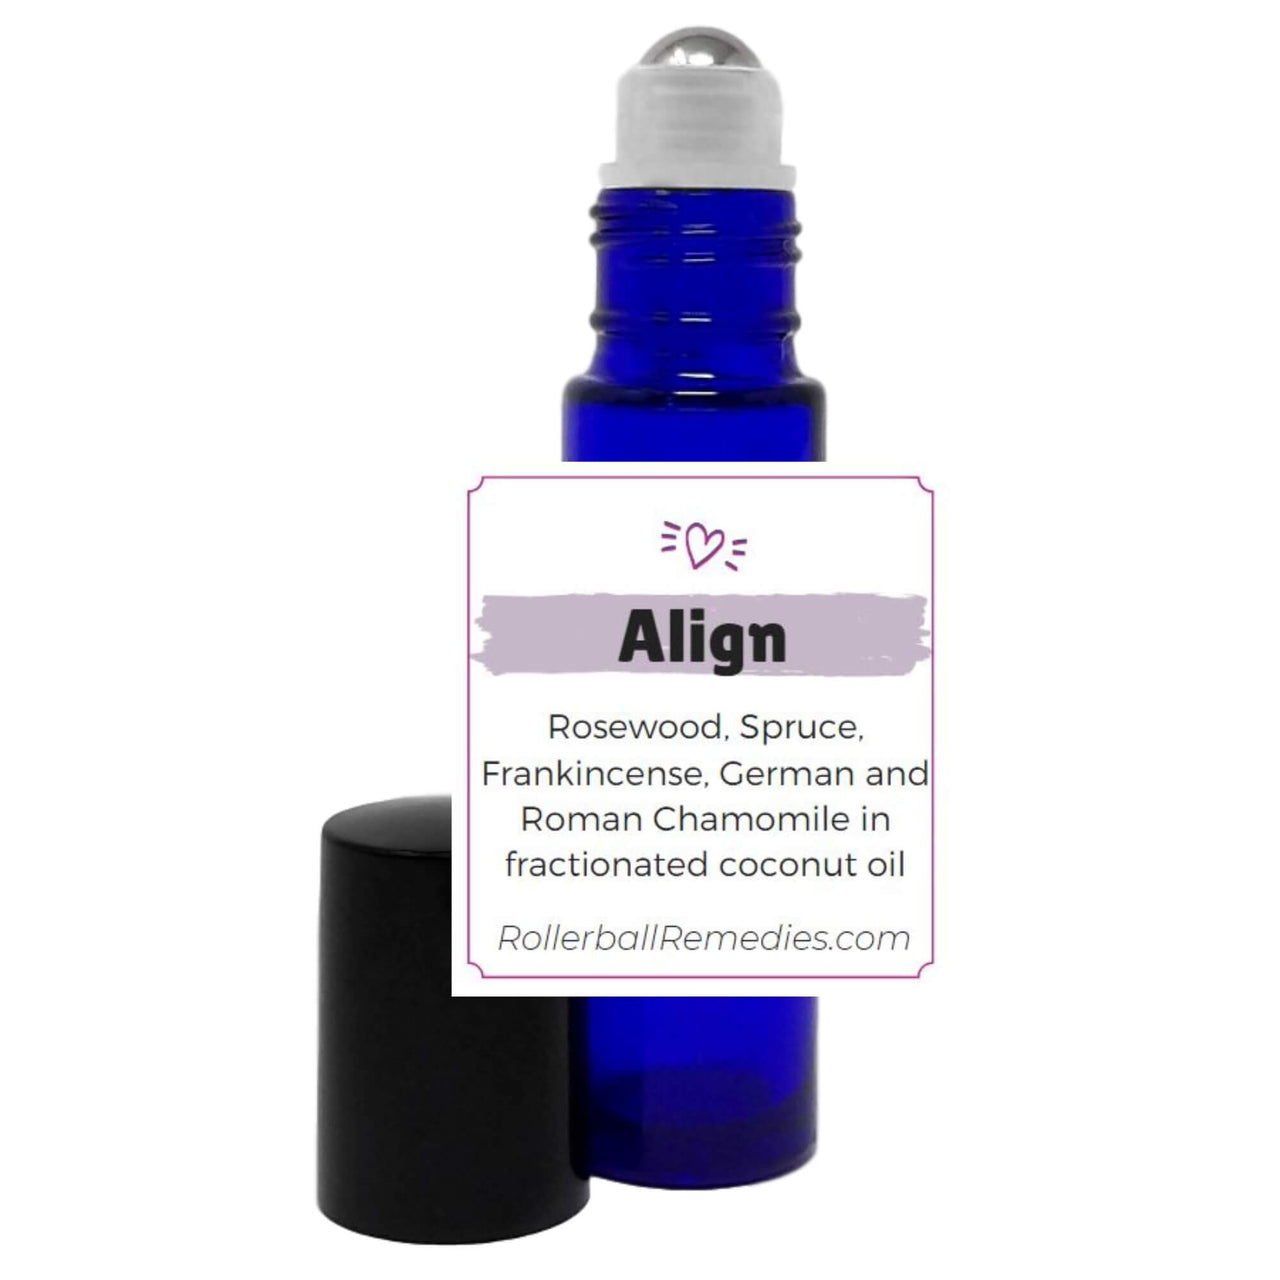 Align Essential Oil Roller Blend - Rosewood, Spruce, Frankincense, German and Roman Chamomile